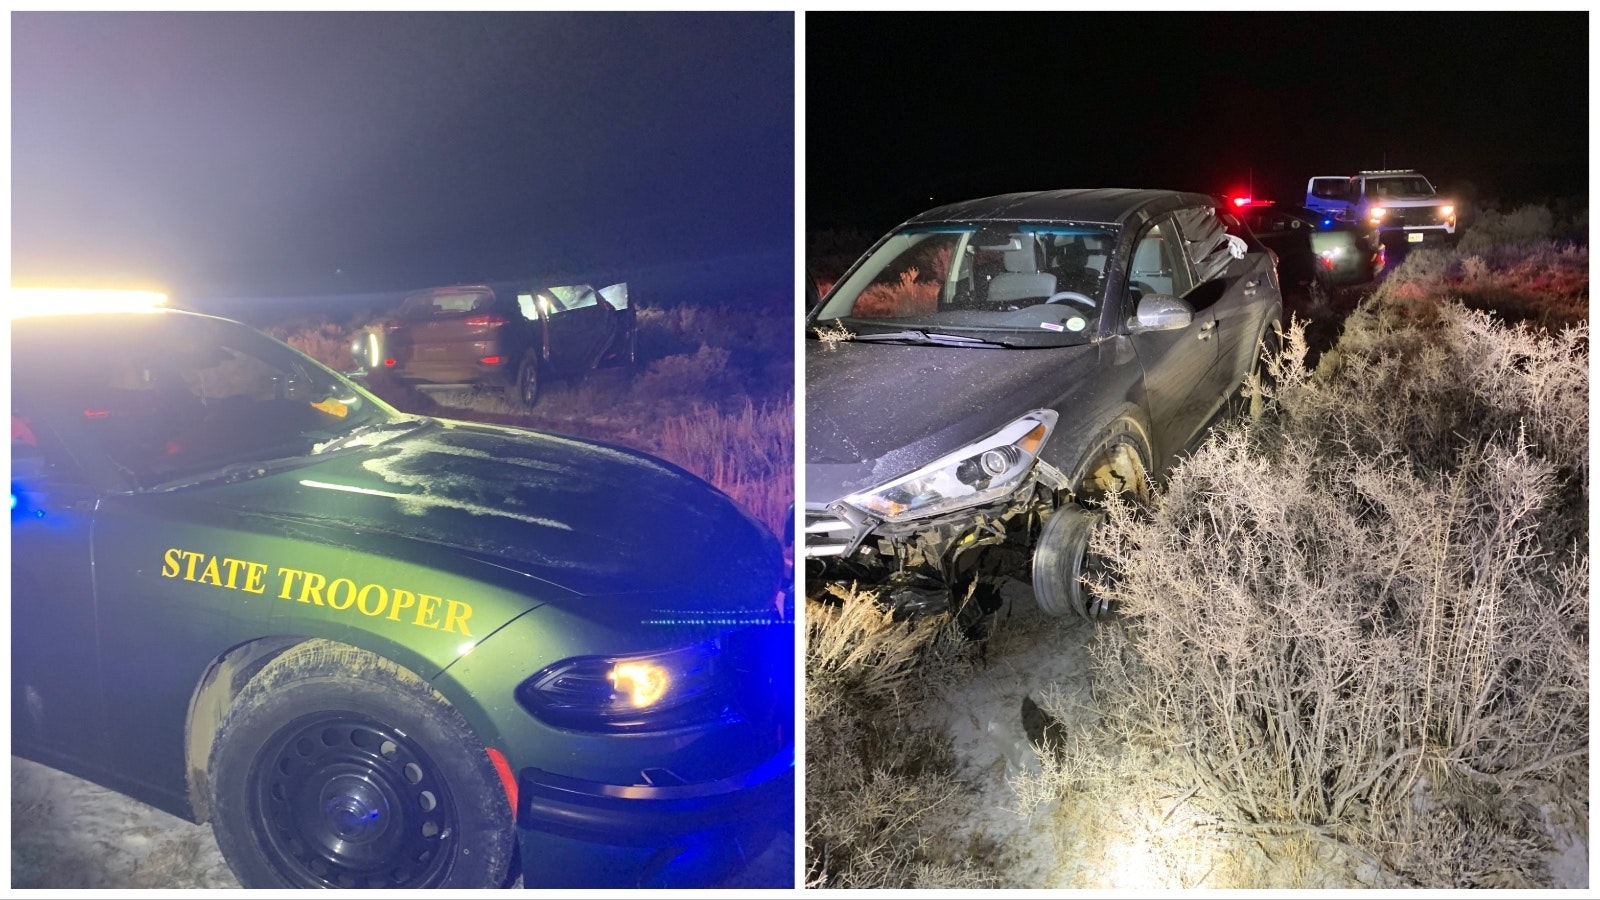 Wyoming Highway Patrol troopers were busy all night responding to crashes because of the slick roads and blowing snow.